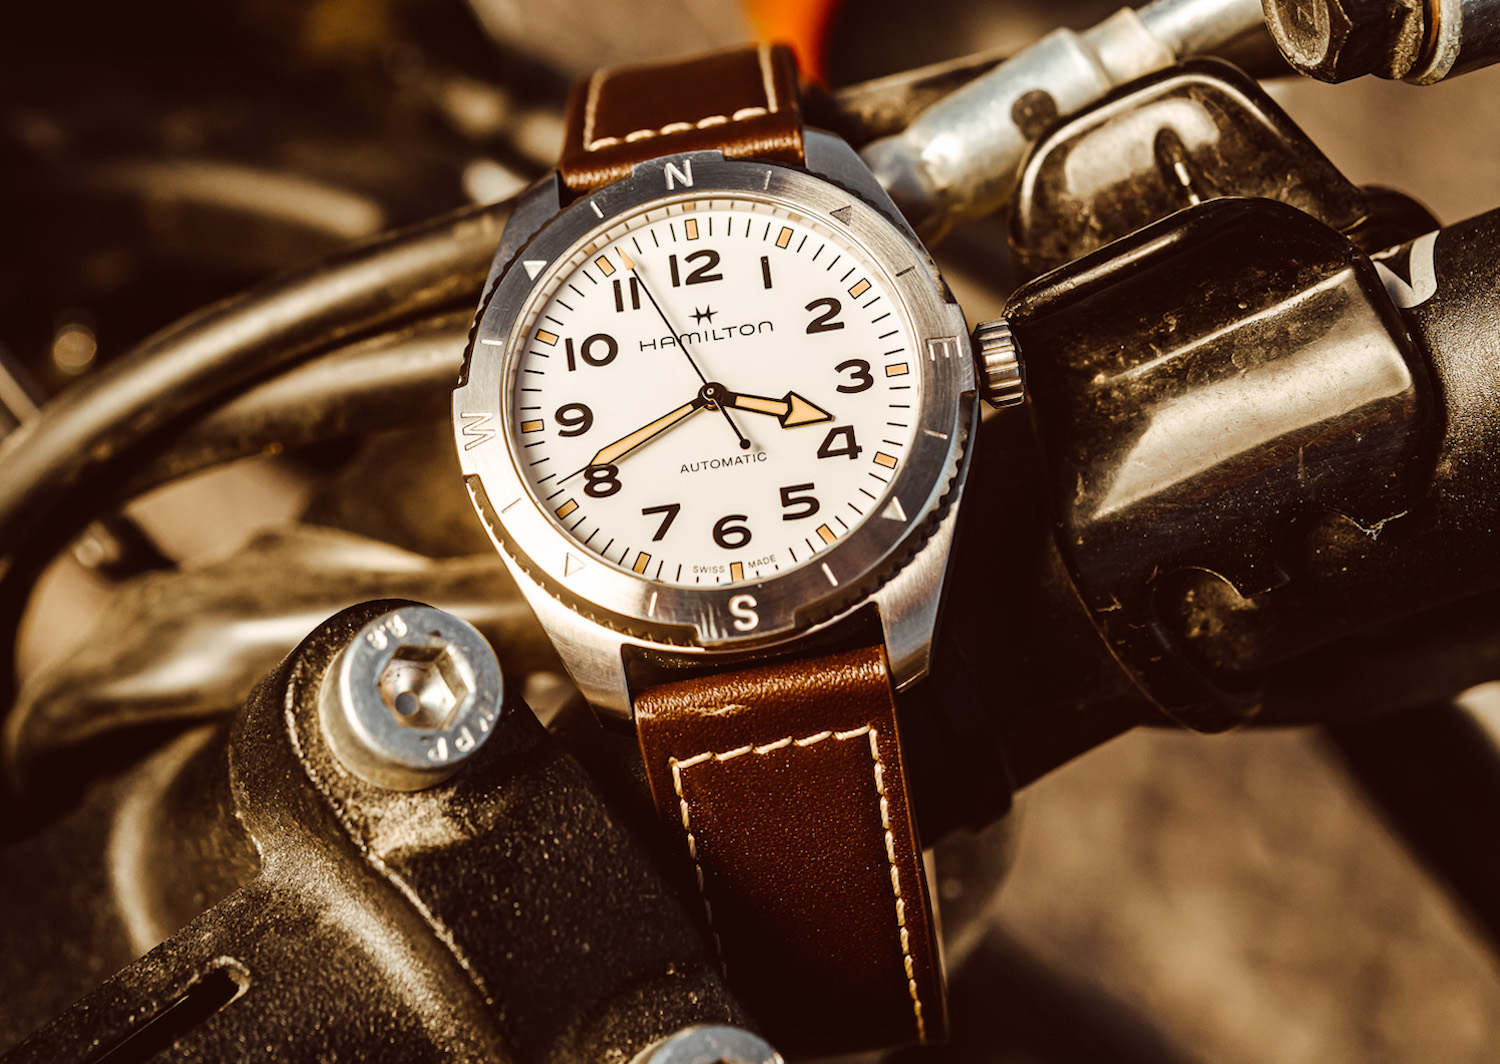 Watch on a motorcycle